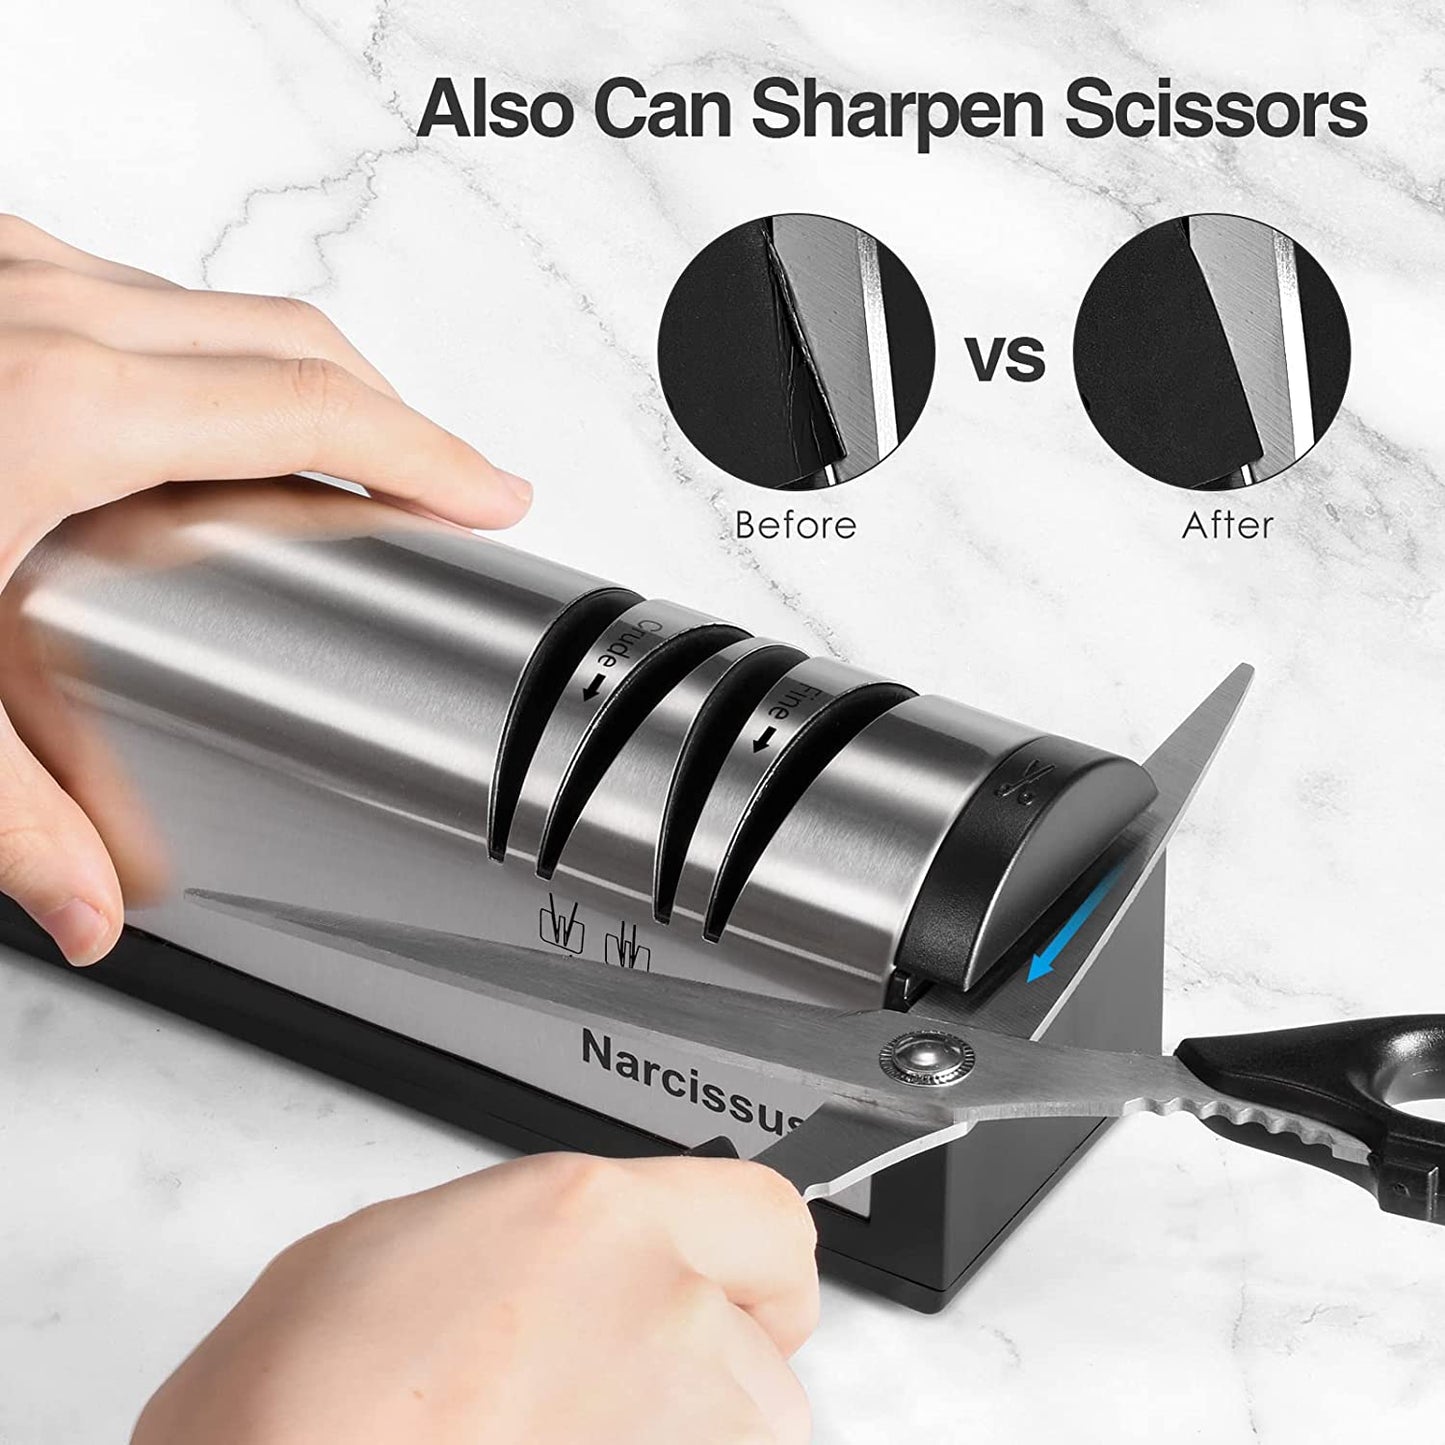 Knife Sharpener, Professional 2 Stage Electric Knife Sharpener for Quick Sharpening & Polishing, with Scissors Sharpener and Metal Dust Collection Box, Stainless Steel, Silver